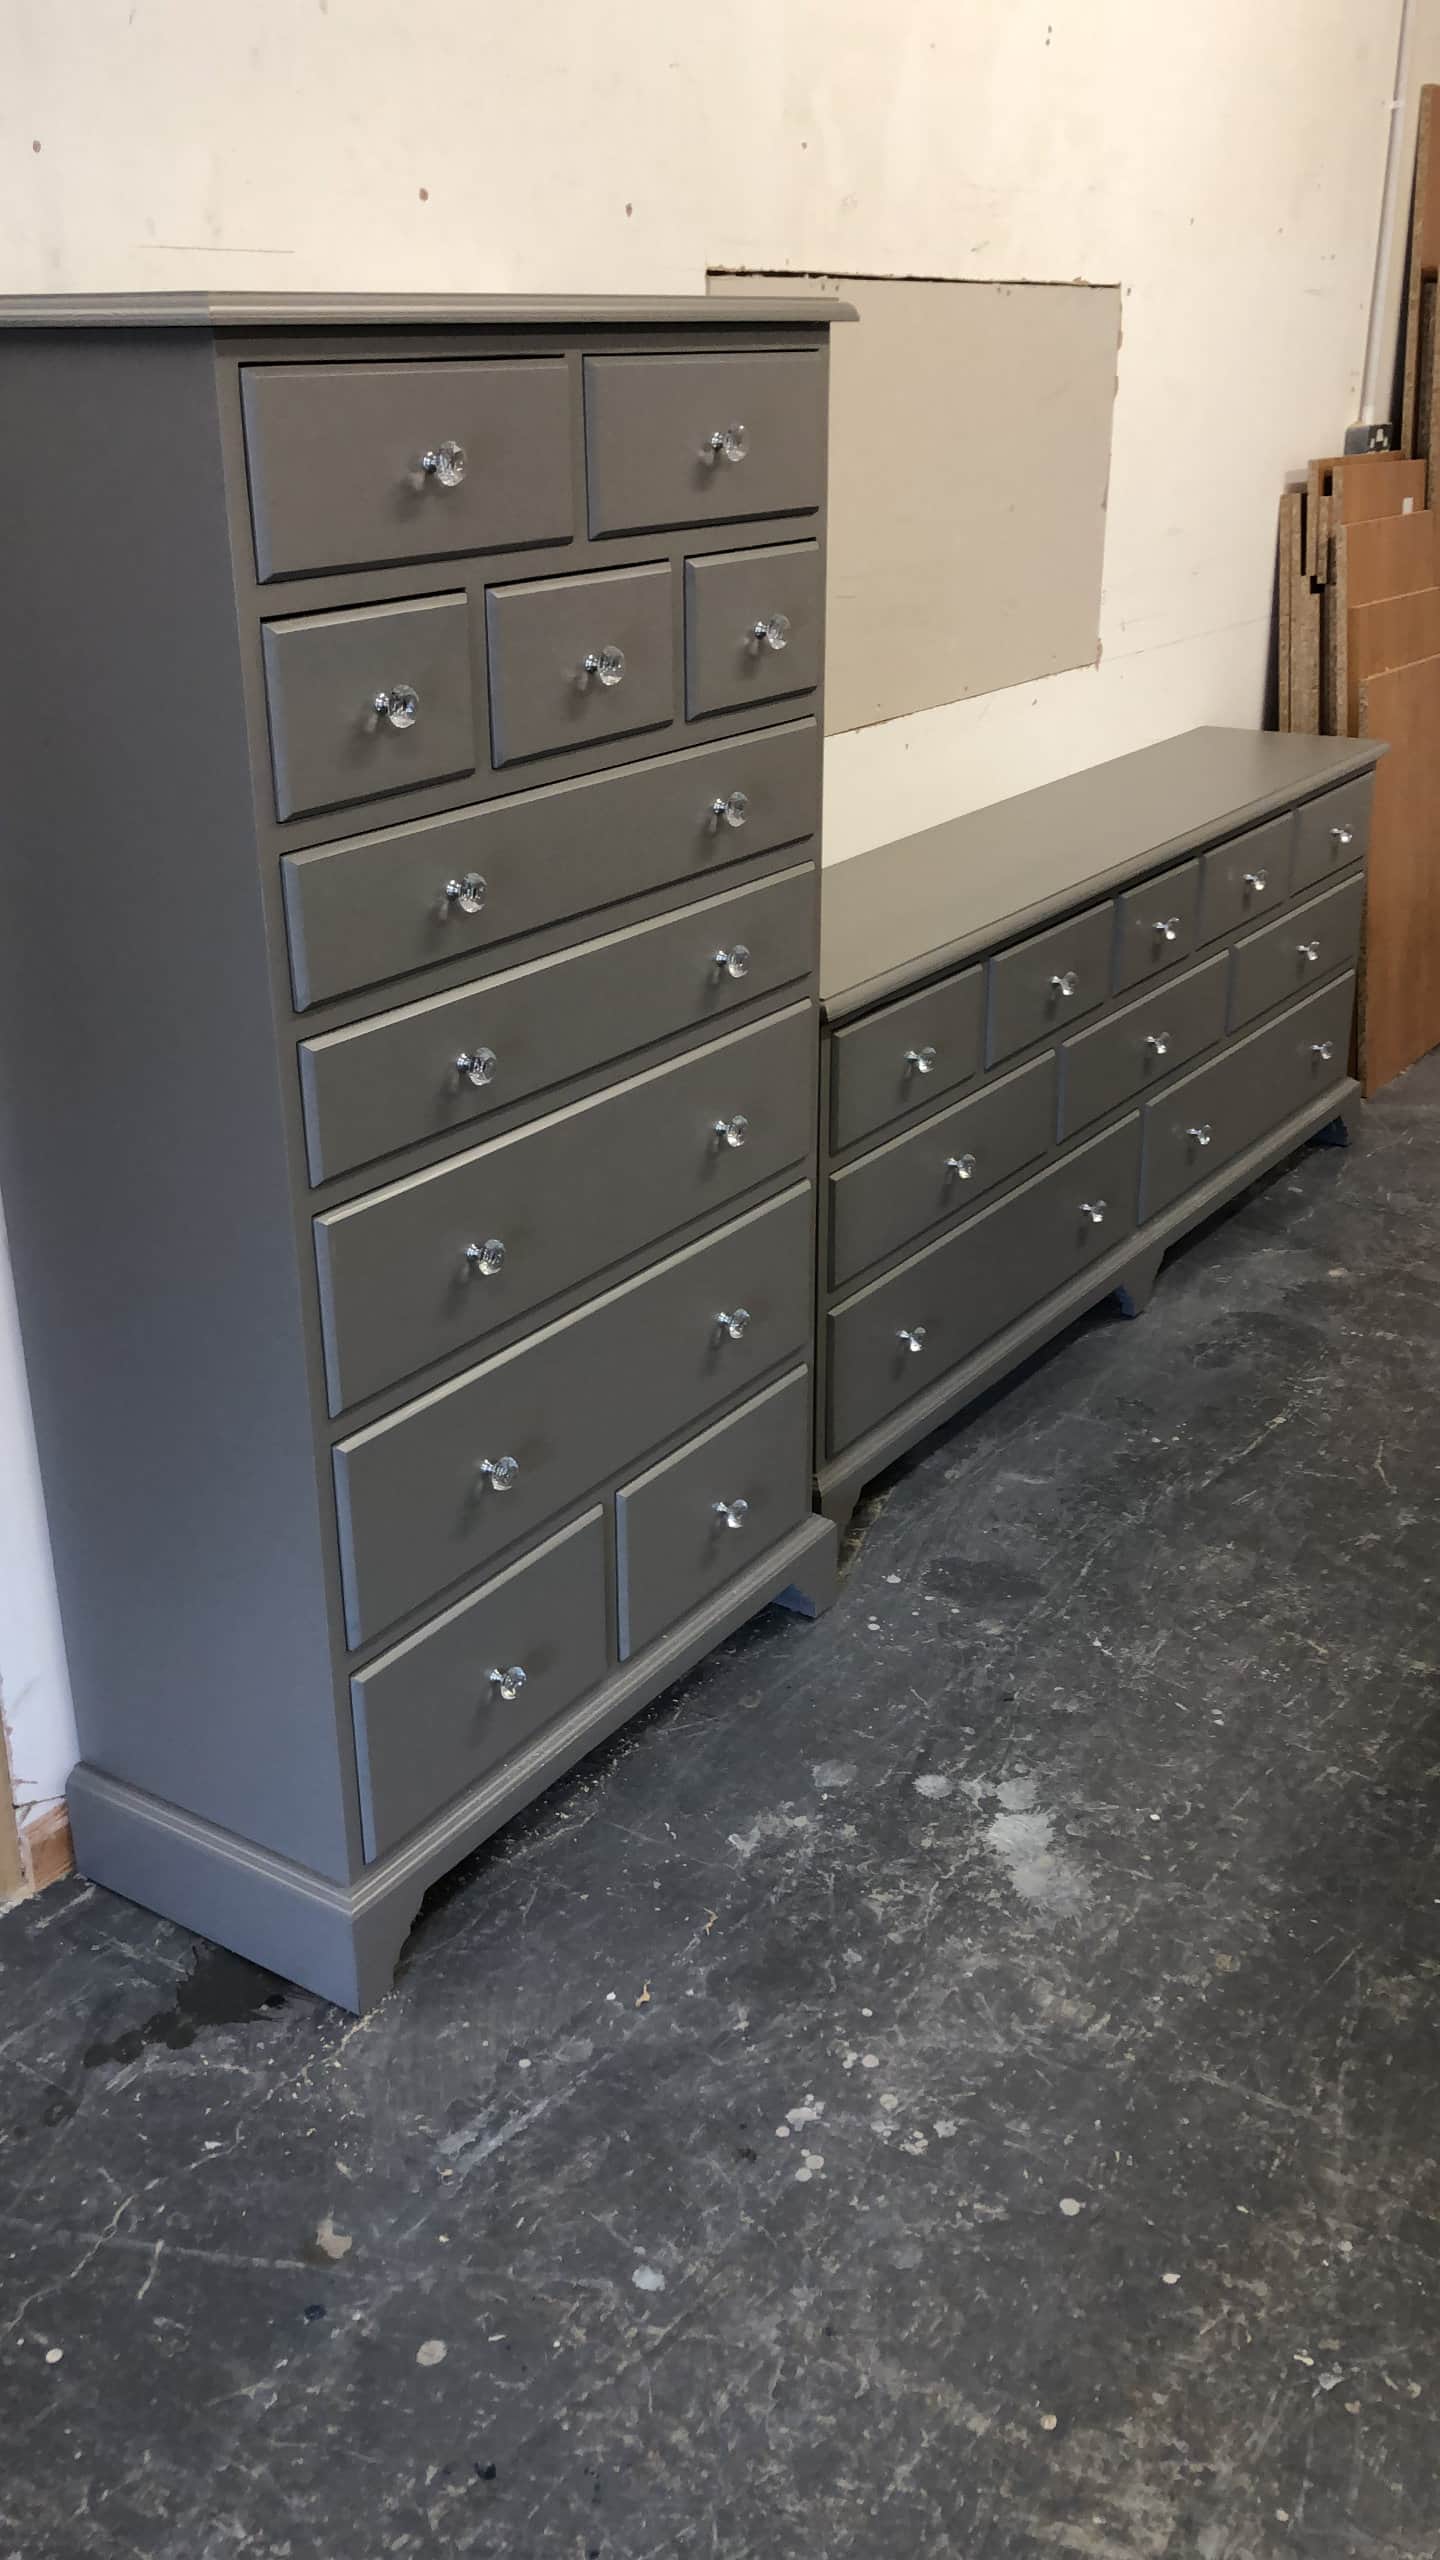 A set of bespoke, painted chests of drawers